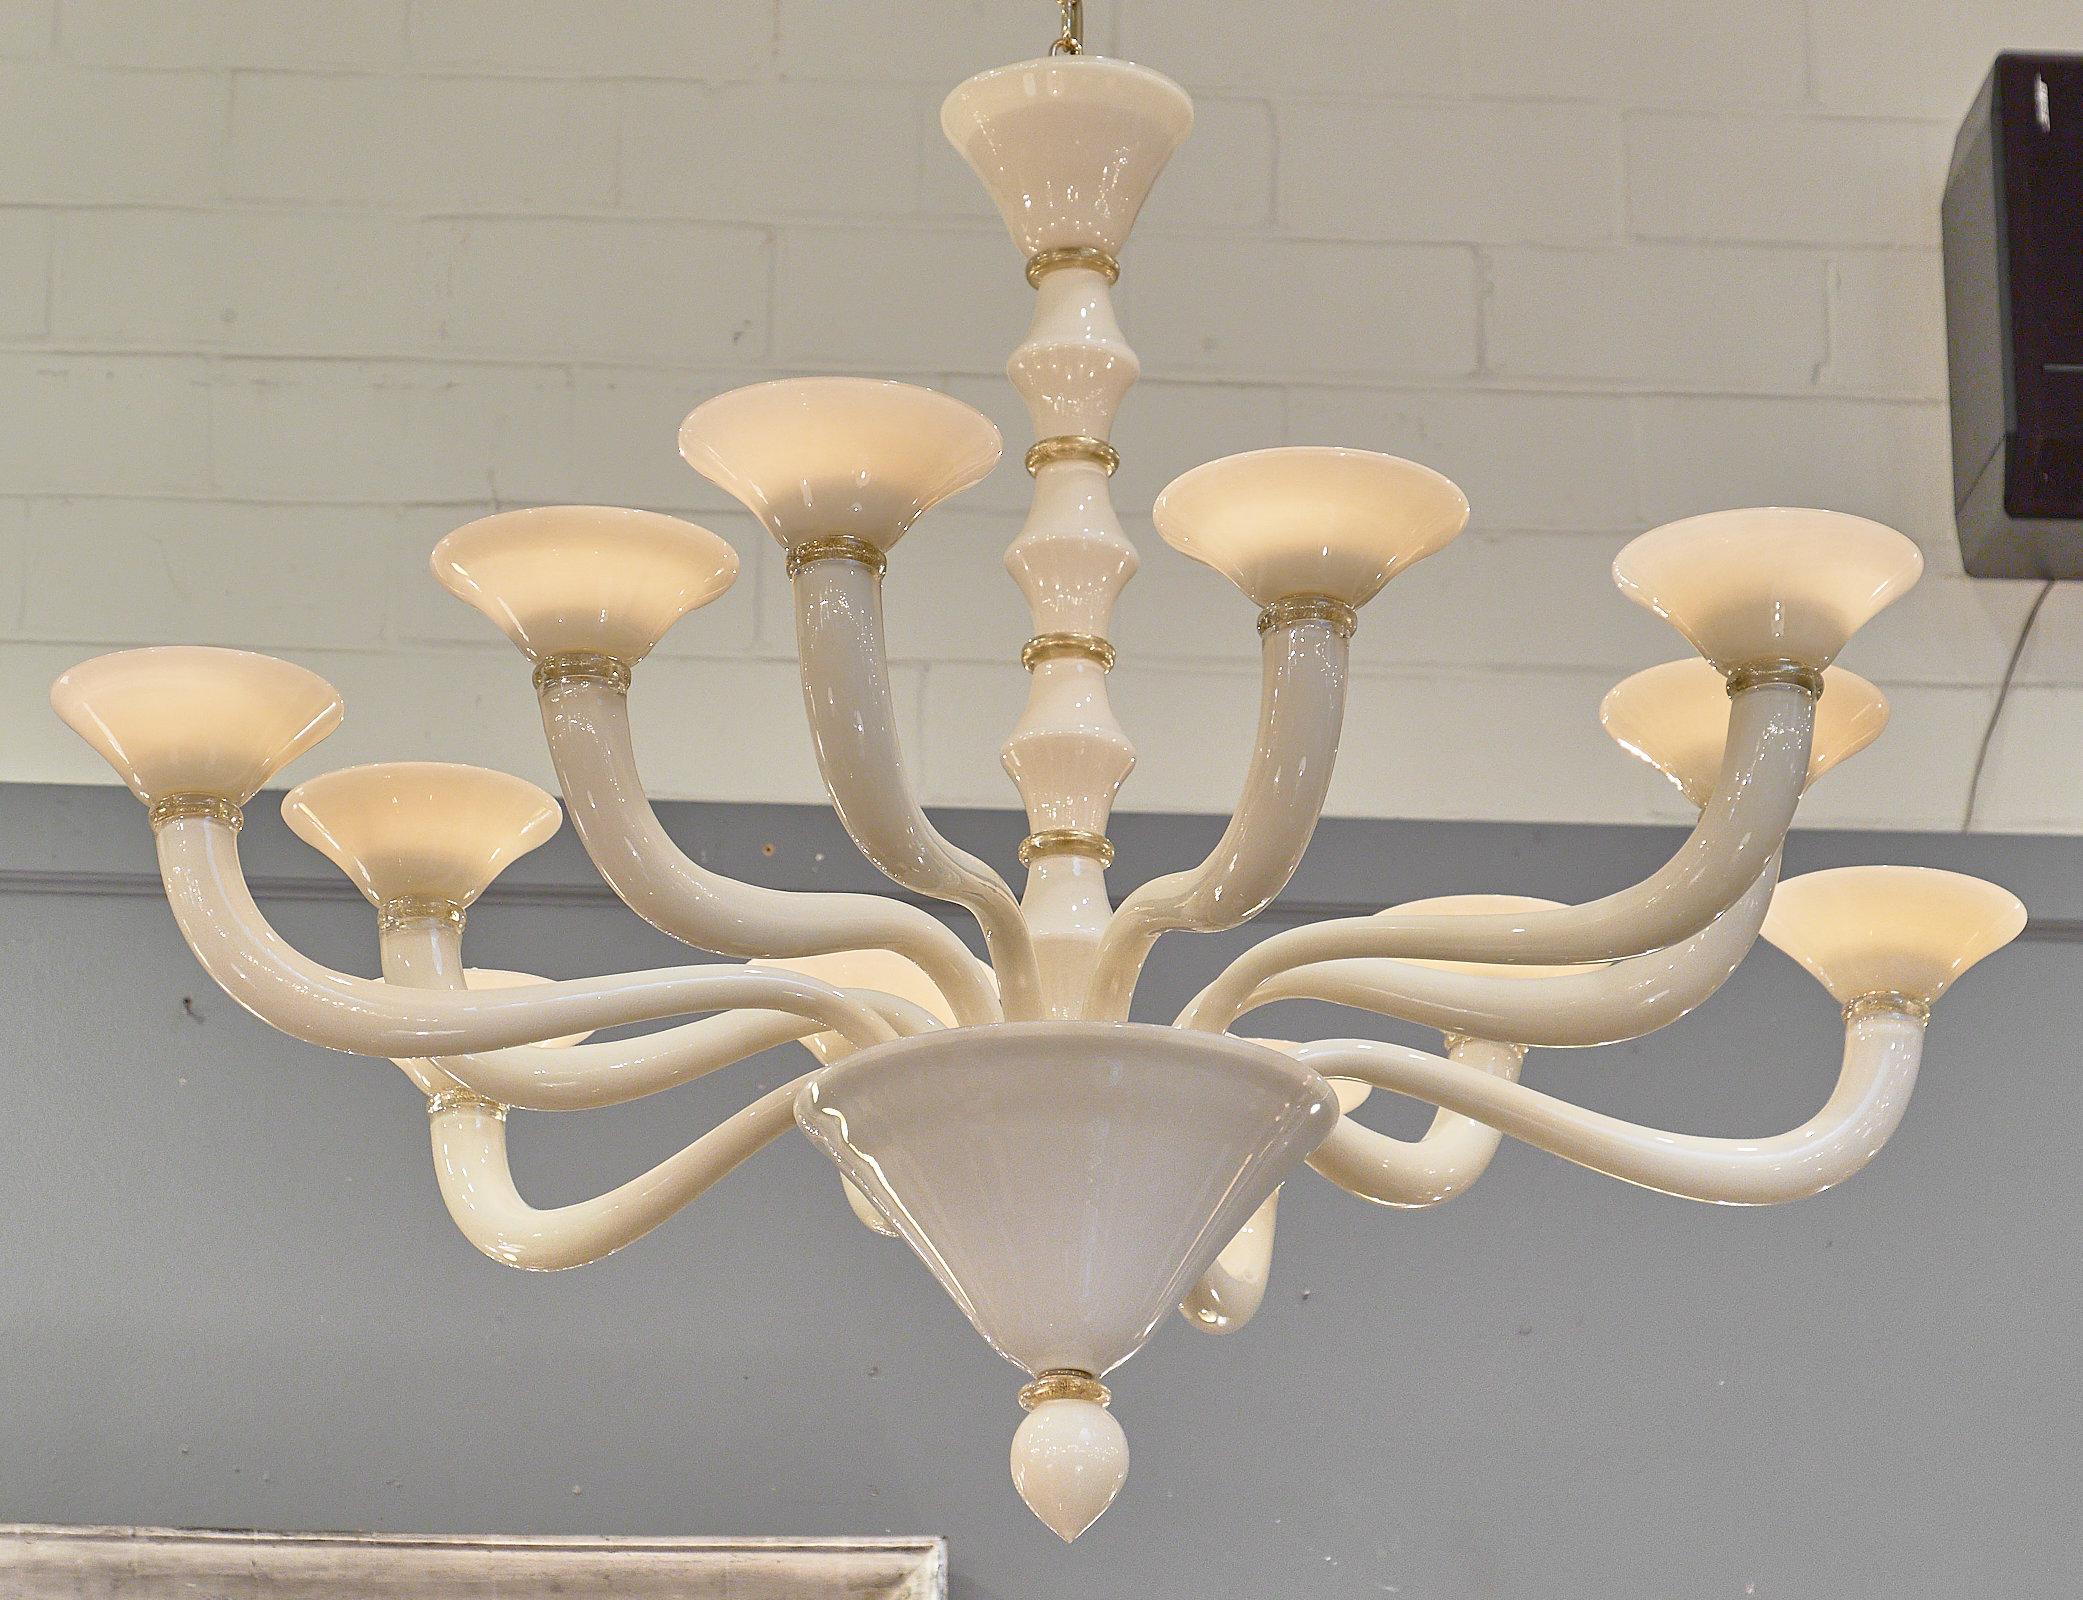 Unique chandelier made of Murano glass in a beautiful, striking ivory color. The twelve arms of the chandelier alternate in length for a dynamic depth. To add texture, there are rings of Murano glass with 23-karat gold leaf throughout the fixture.